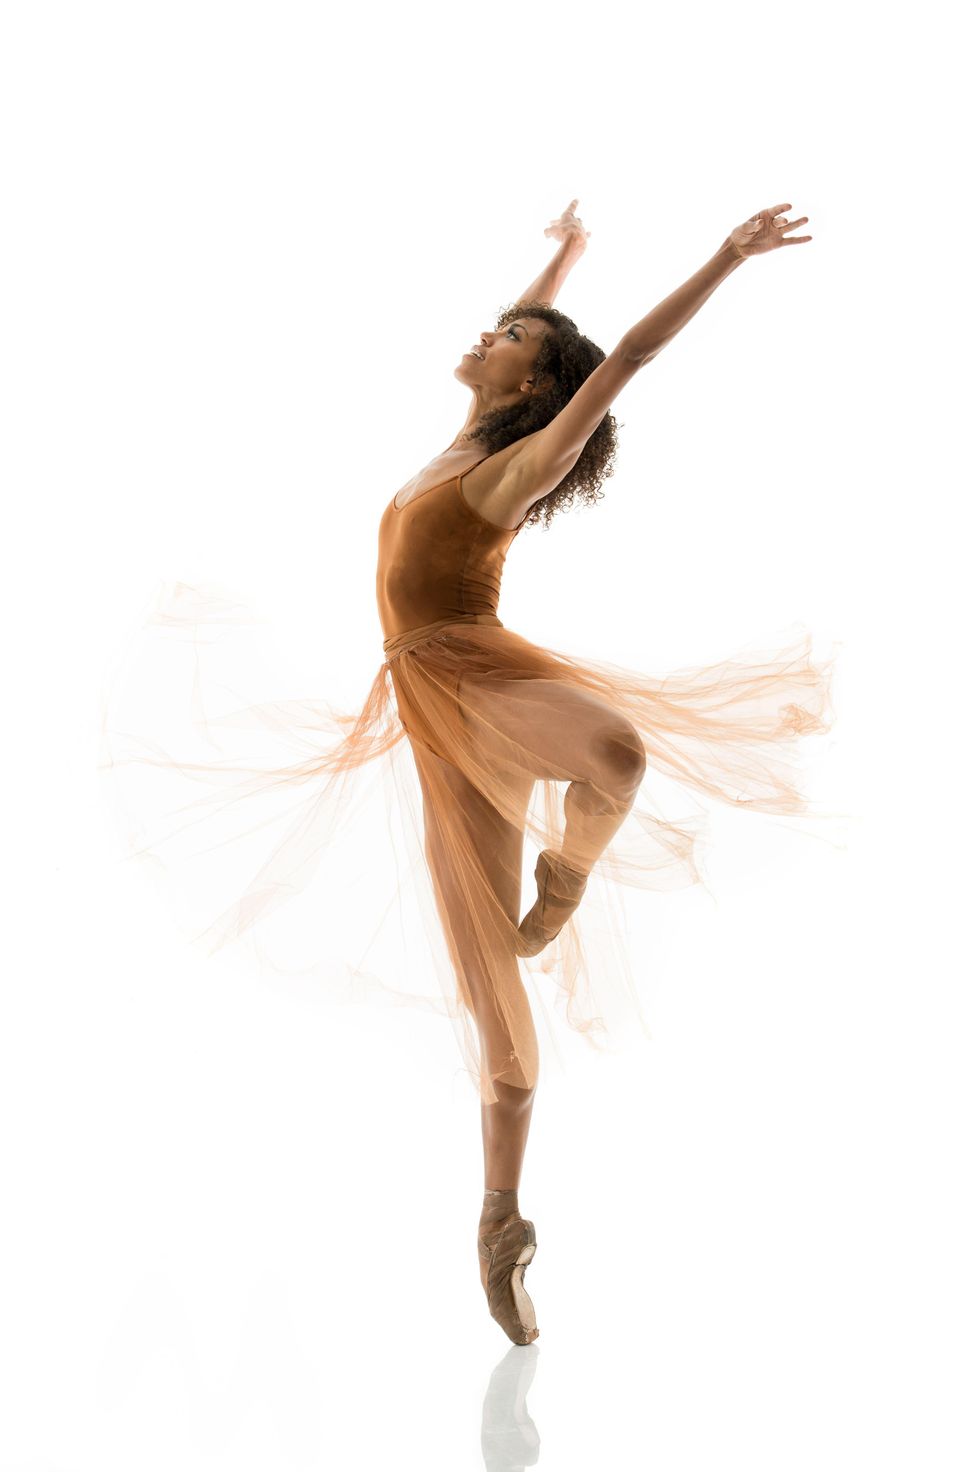 Donnell stands on pointe in passe back, her hands reaching up and behind her head, in an orange dress that flows behind her.